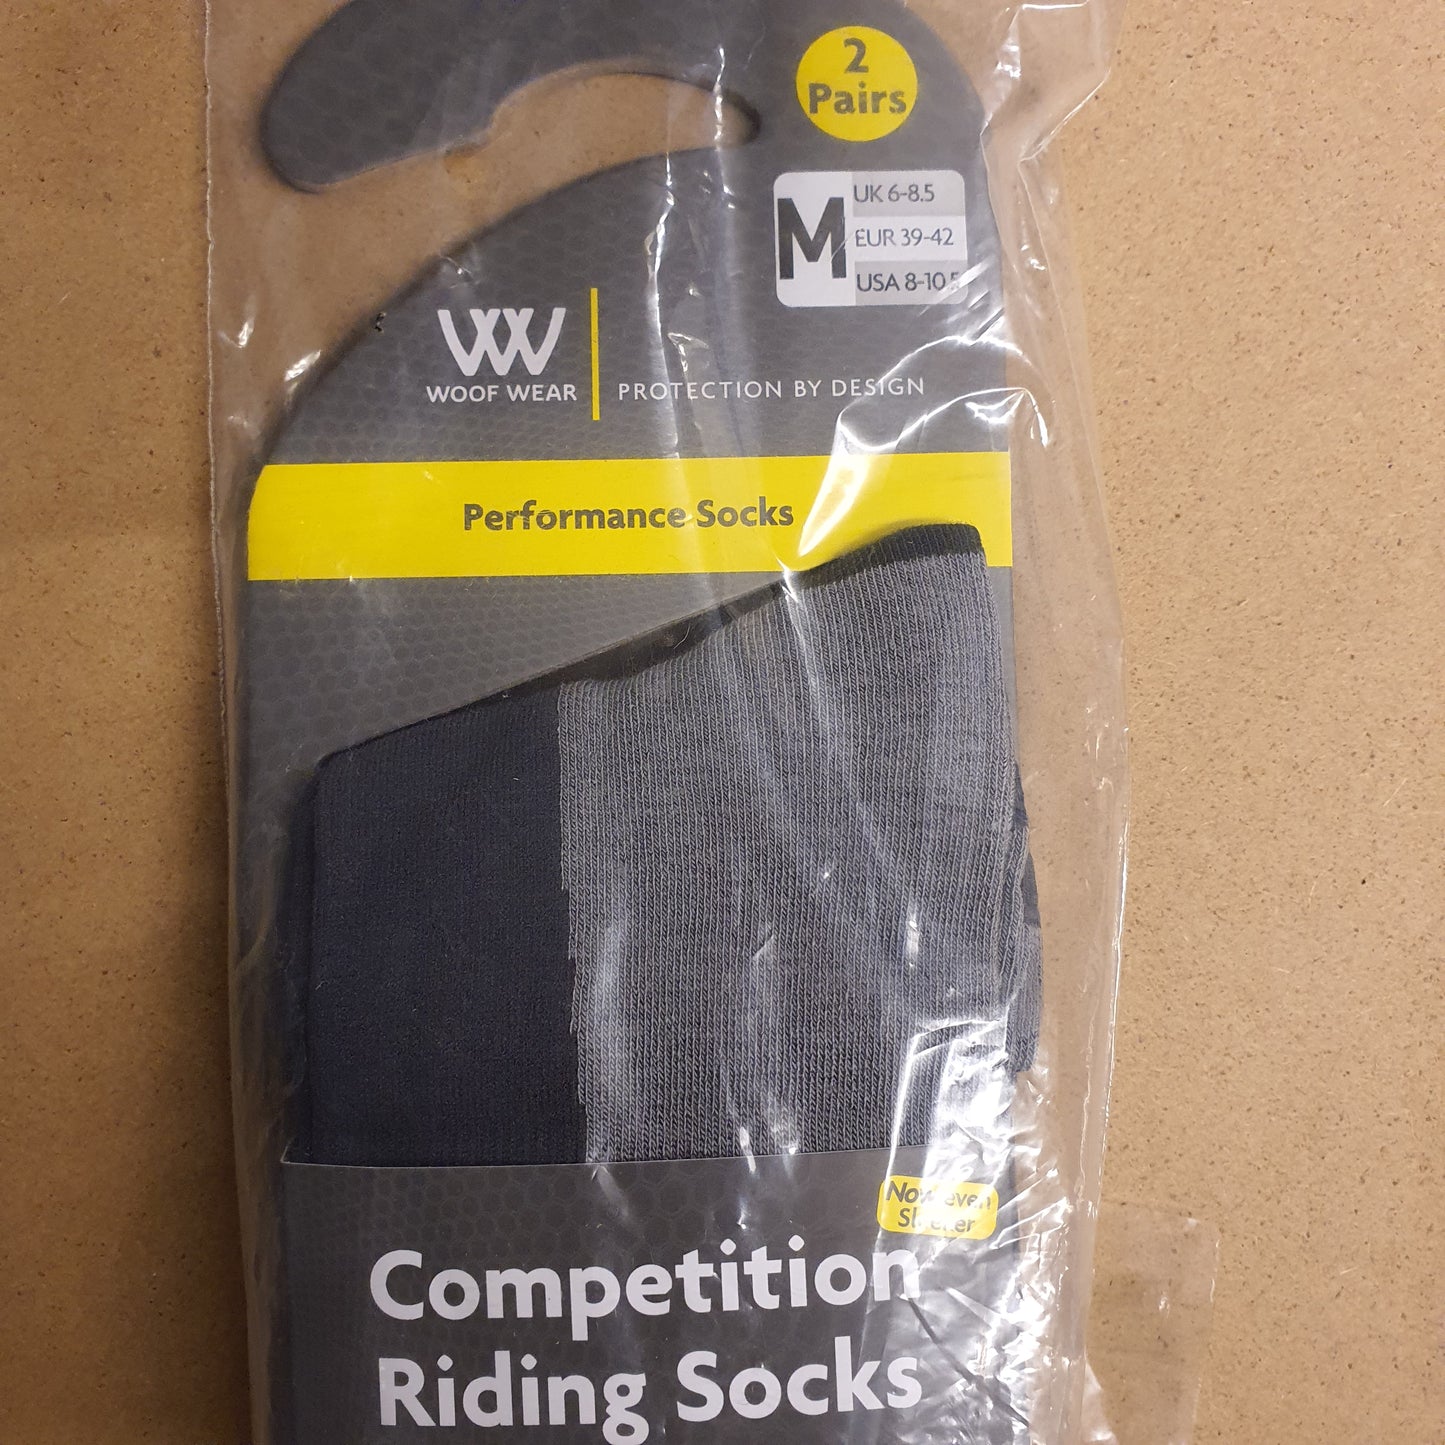 Woof Wear bamboo fibre competition socks - 2 pairs, grey